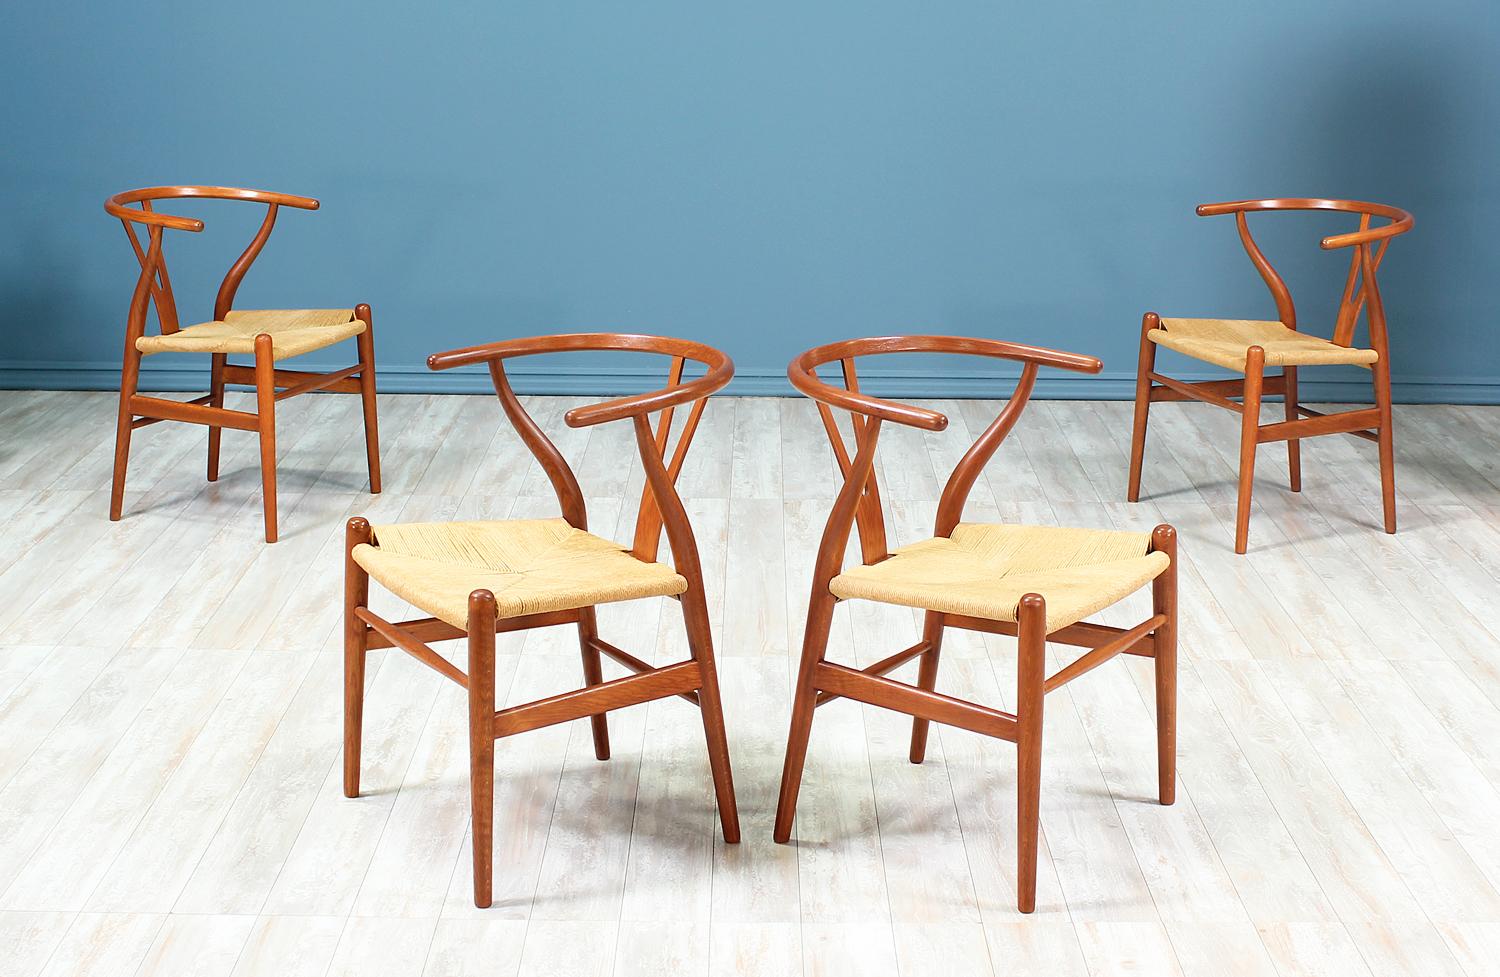 Set of four CH-24 dining chairs designed by Hans J. Wegner for Carl Hansen & Søn in Denmark in 1950. Often referred to as the ‘Wishbone’ chair or the ‘Y’ chair, this iconic design with Chinese influences, features an oak wood frame and the original